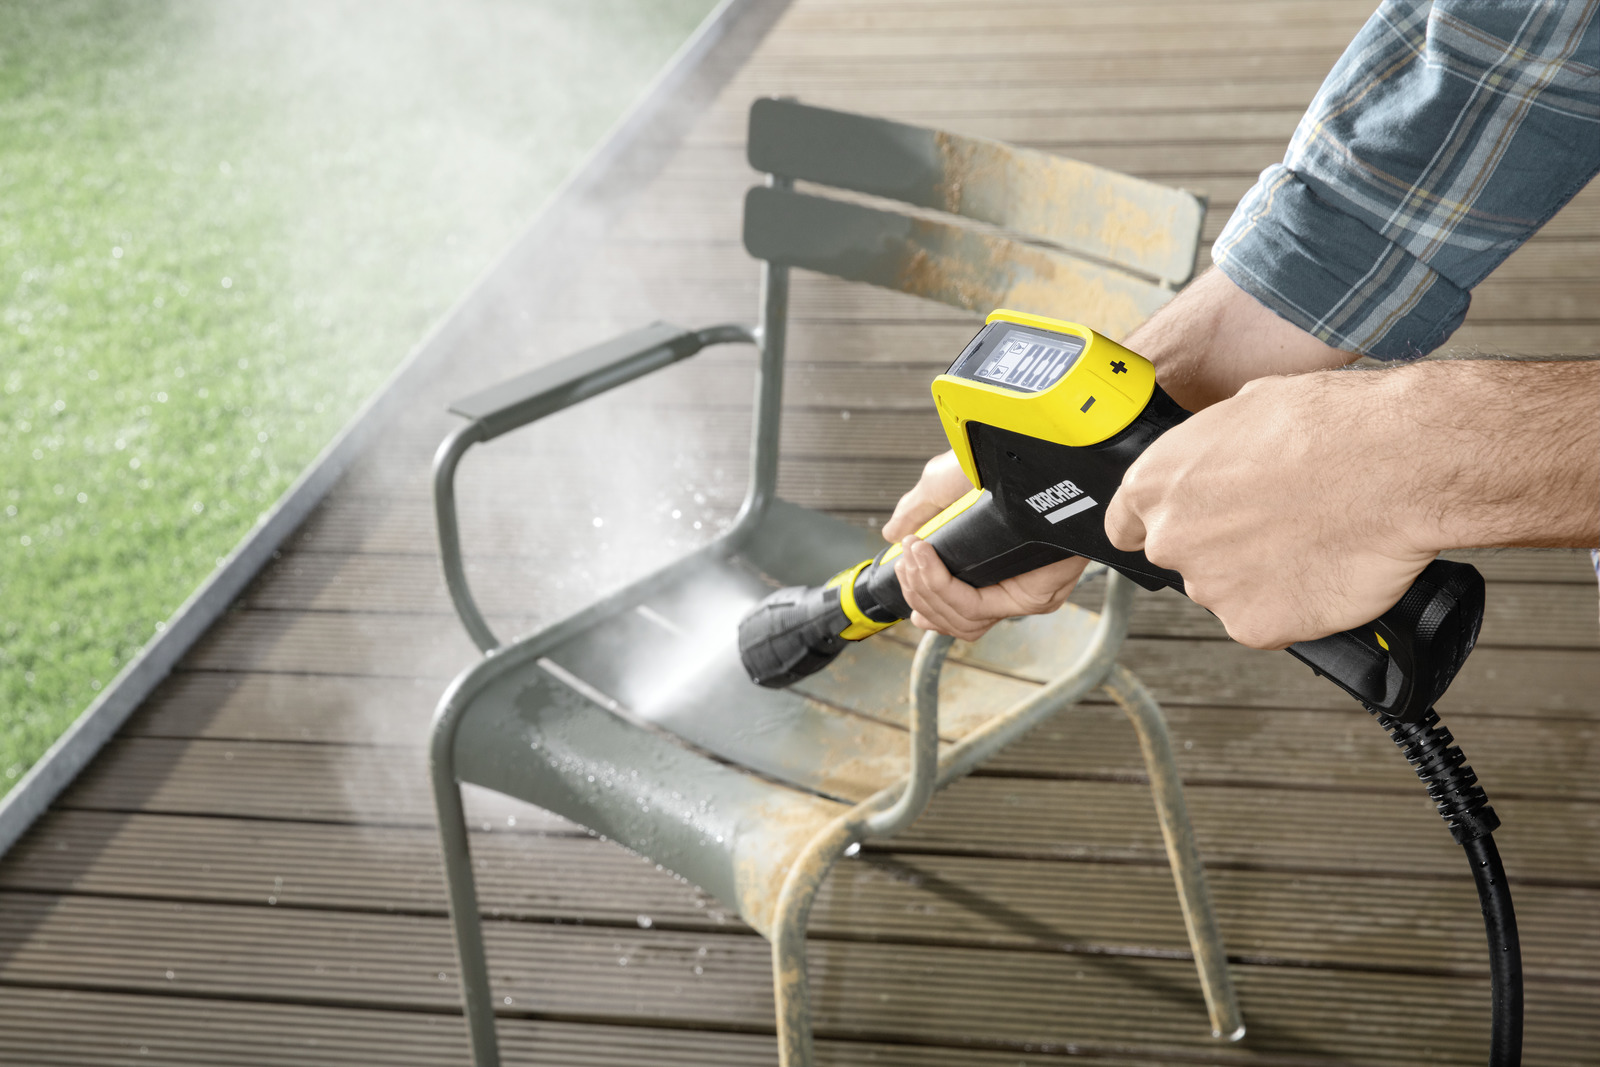 Karcher 1.324-684.0 2000 PSI 1.55 GPM K 5 Premium Smart Control CHK Cold Water Electric Pressure Washer Plus Surface Cleaner